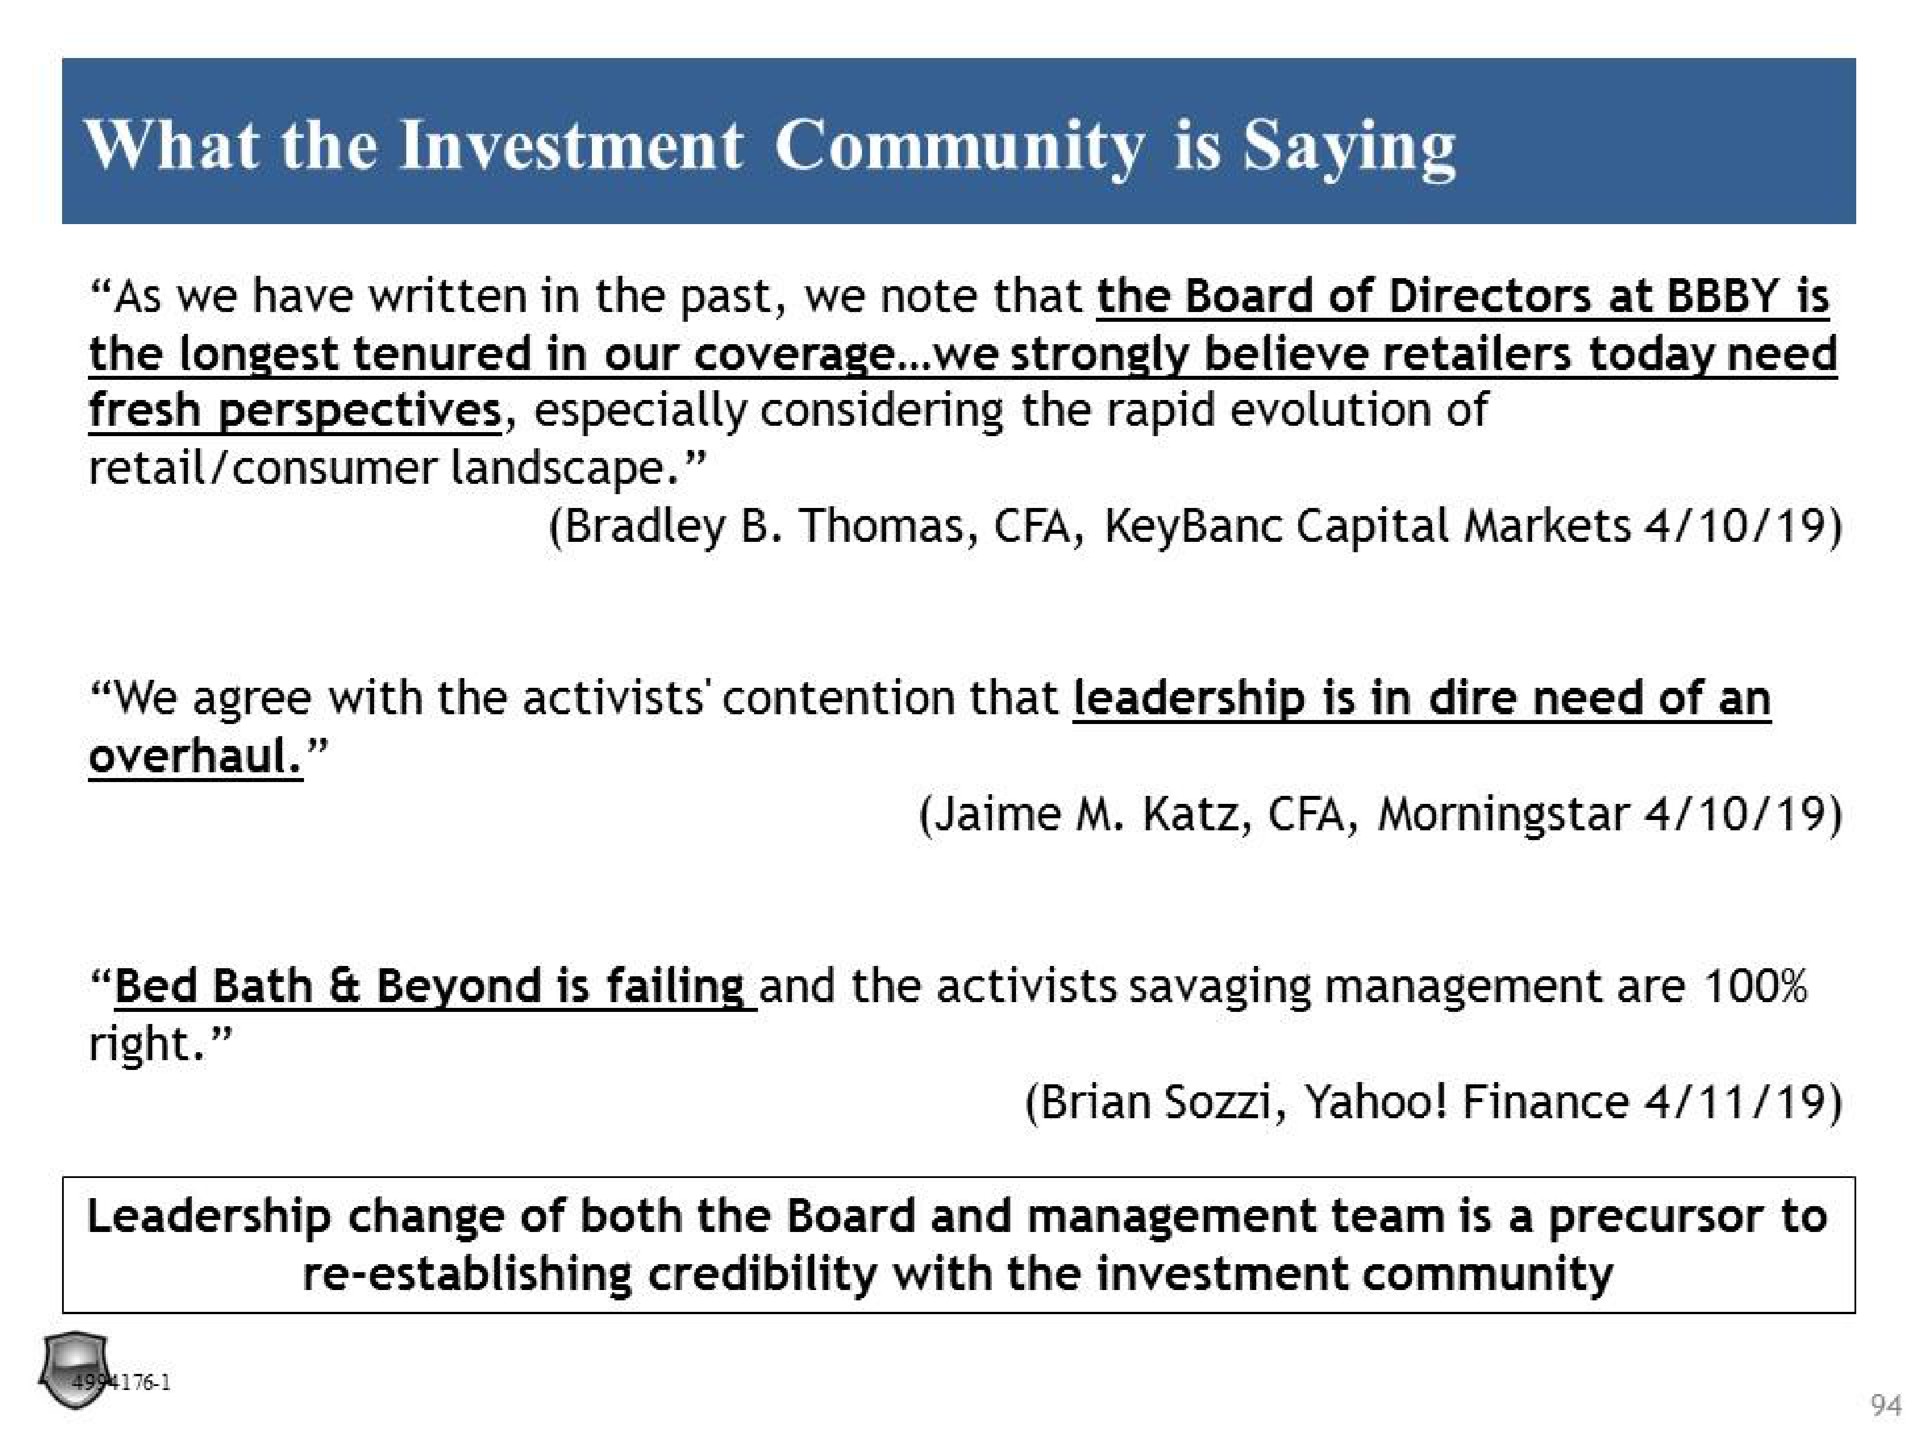 what the investment community is saying as we have written in the past we note that the board of directors at is the tenured in our coverage we strongly believe retailers today need fresh perspectives especially considering the rapid evolution of retail consumer landscape capital markets we agree with the activists contention that leadership is in dire need of an overhaul bed bath beyond is failing right and the activists savaging management are yahoo finance | Legion Partners